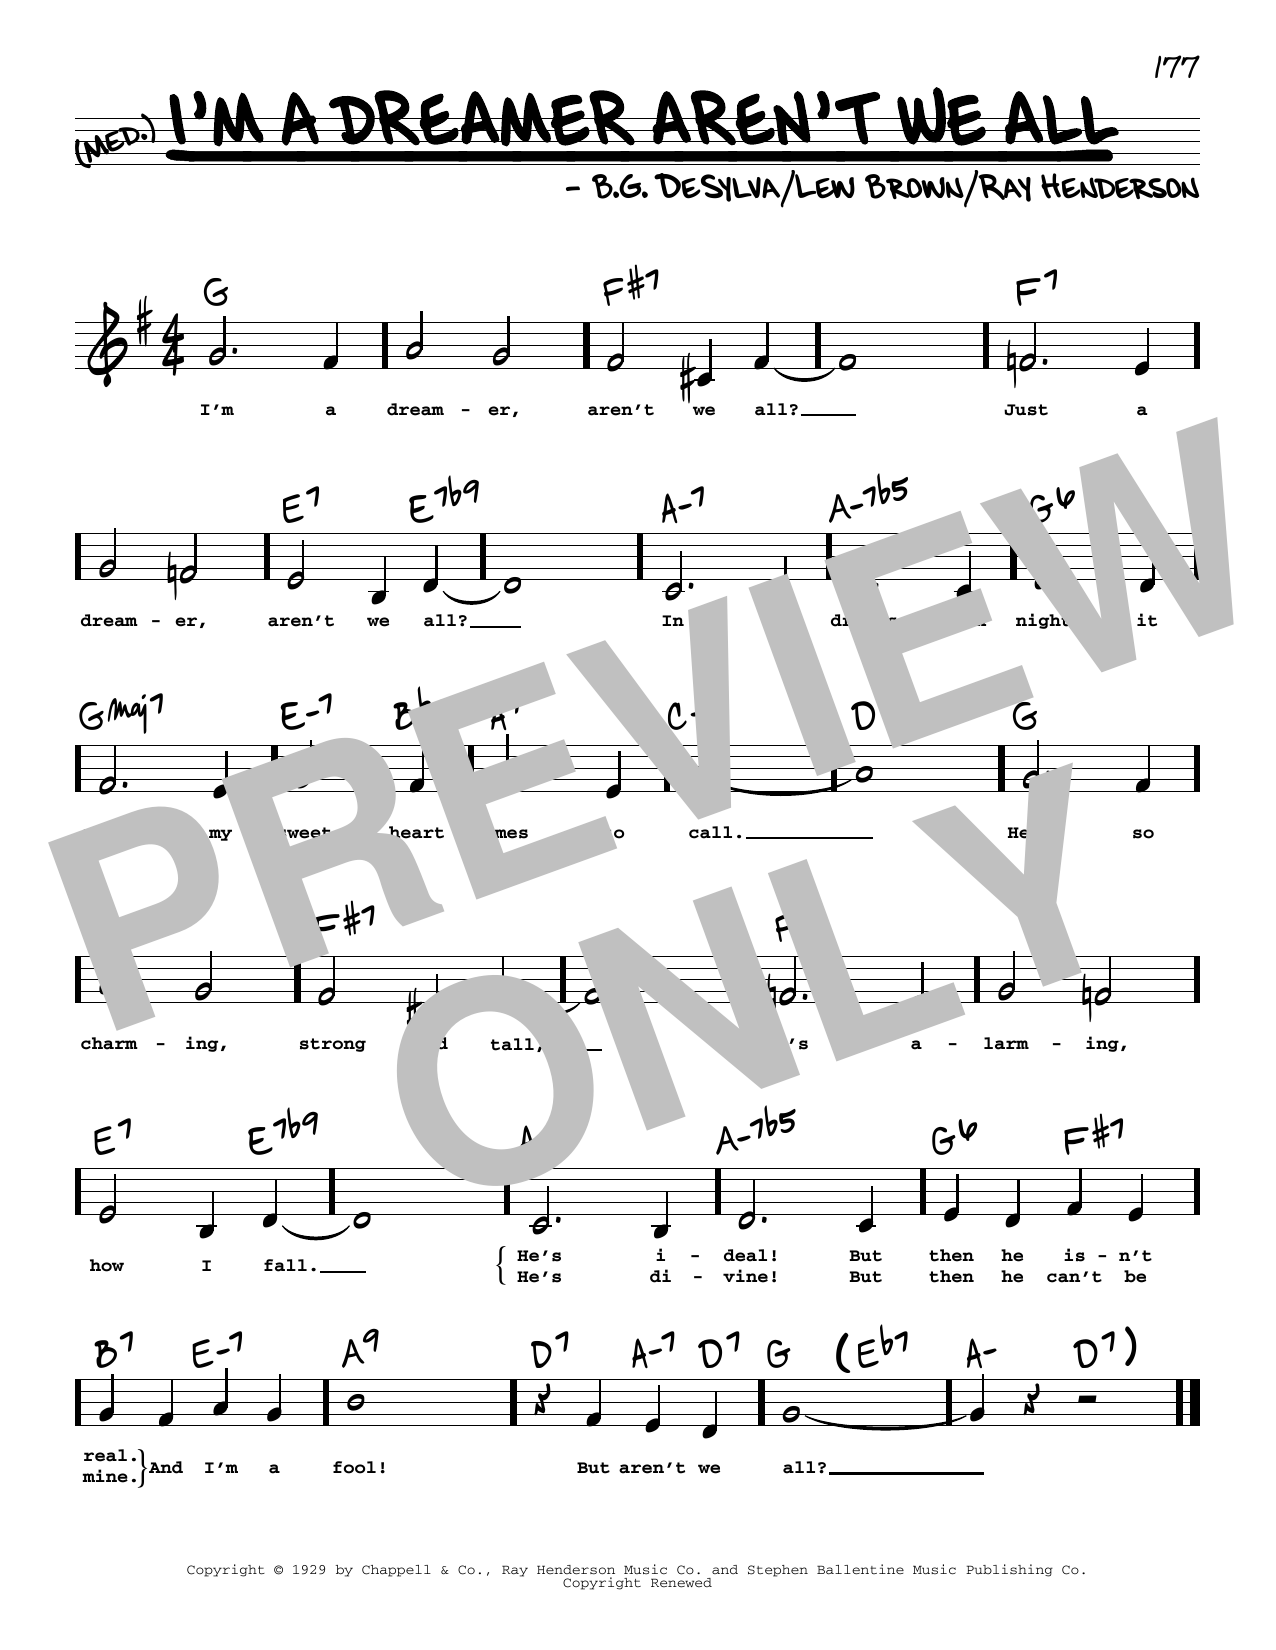 Bobby Sherwood I'm A Dreamer Aren't We All (Low Voice) sheet music notes printable PDF score